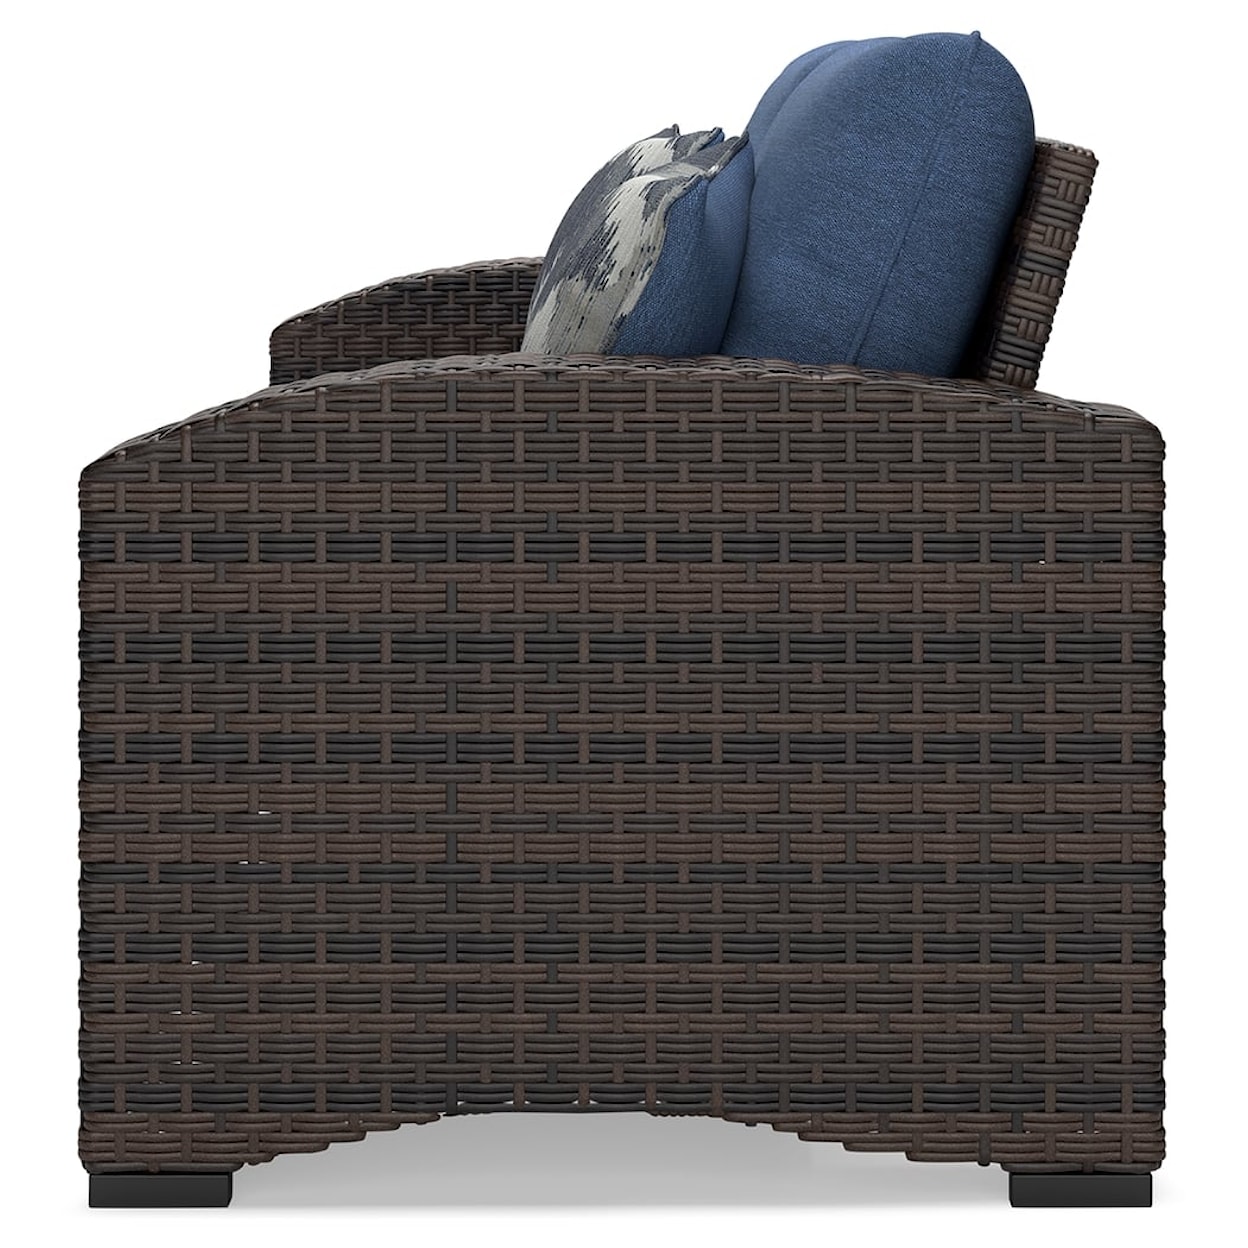 Benchcraft Windglow Outdoor Loveseat with Cushion